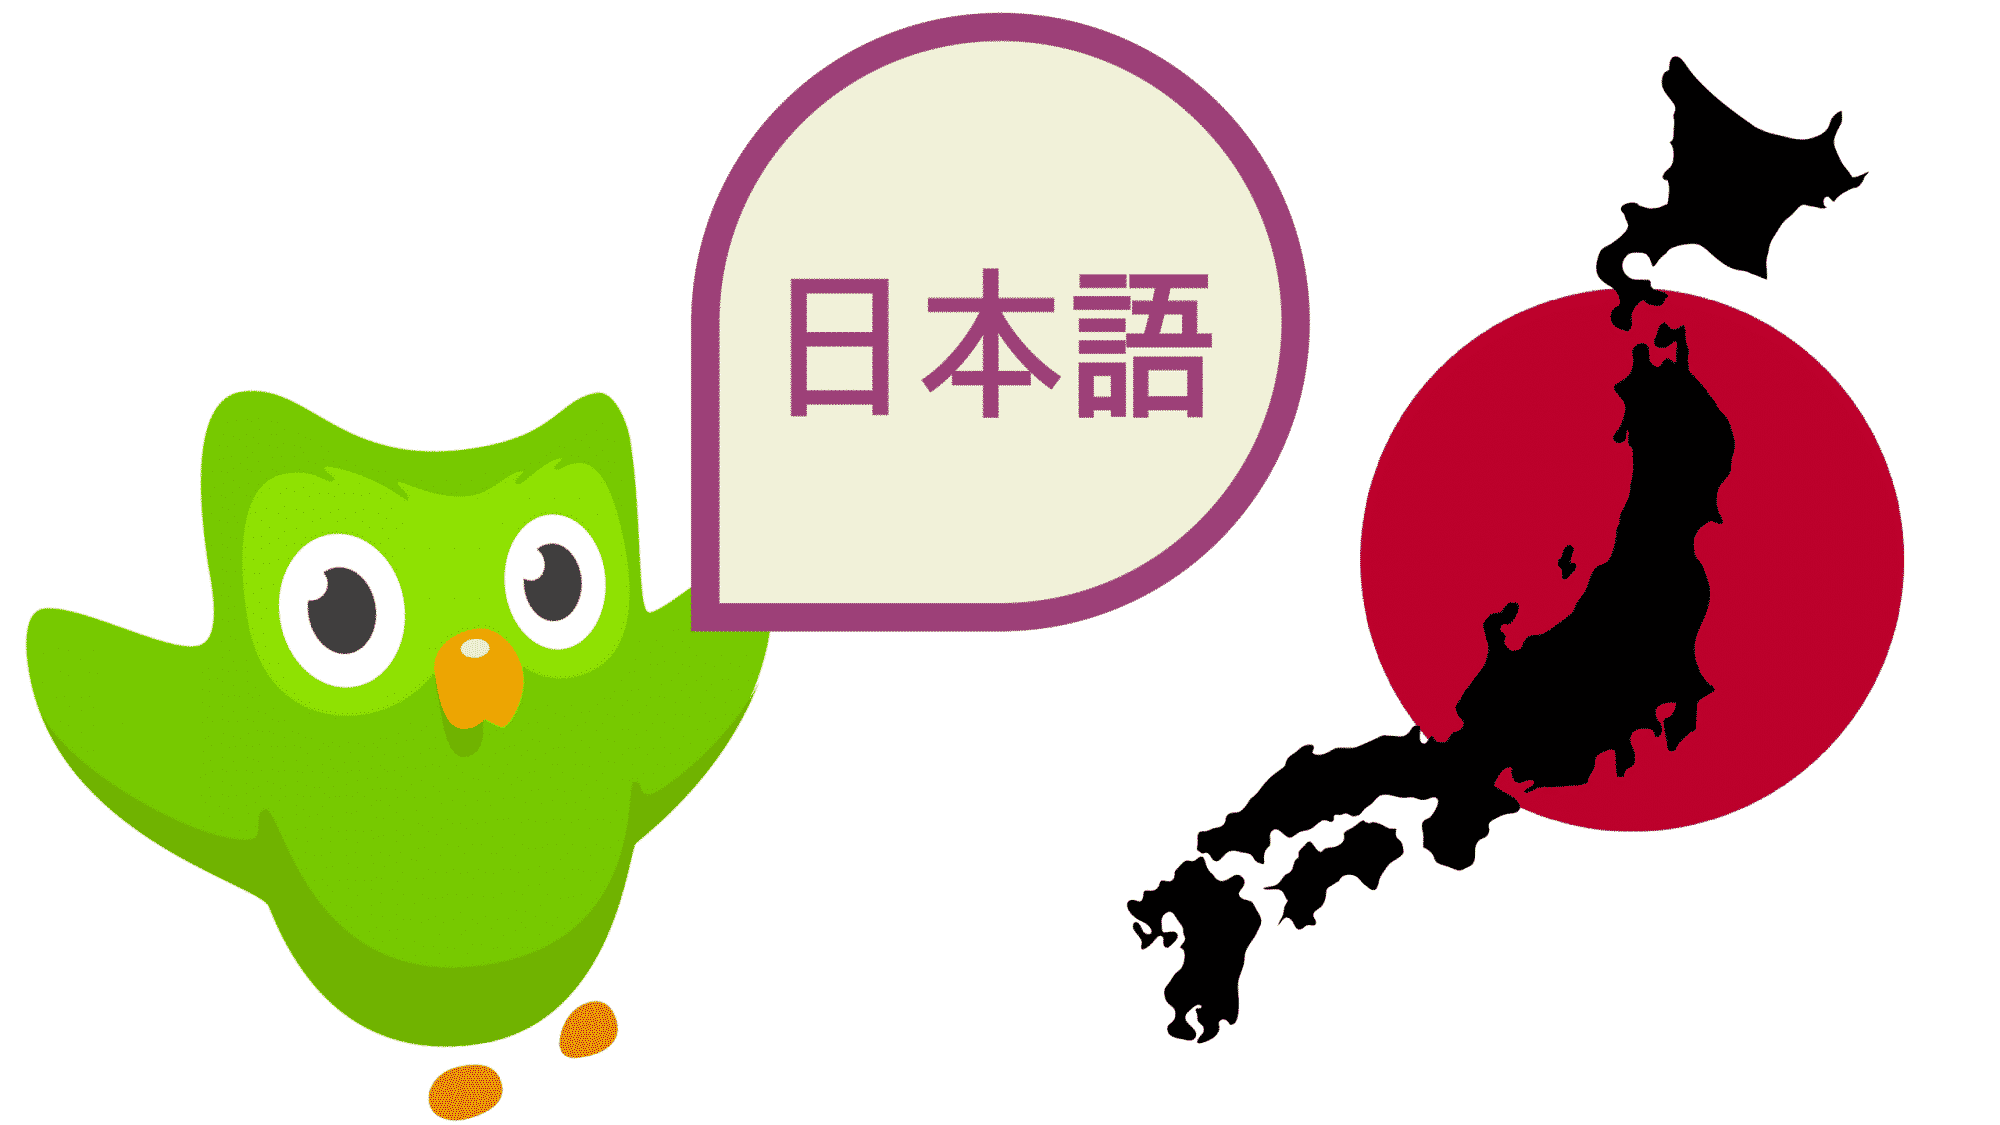 REVIEW: Learn Japanese with Duolingo